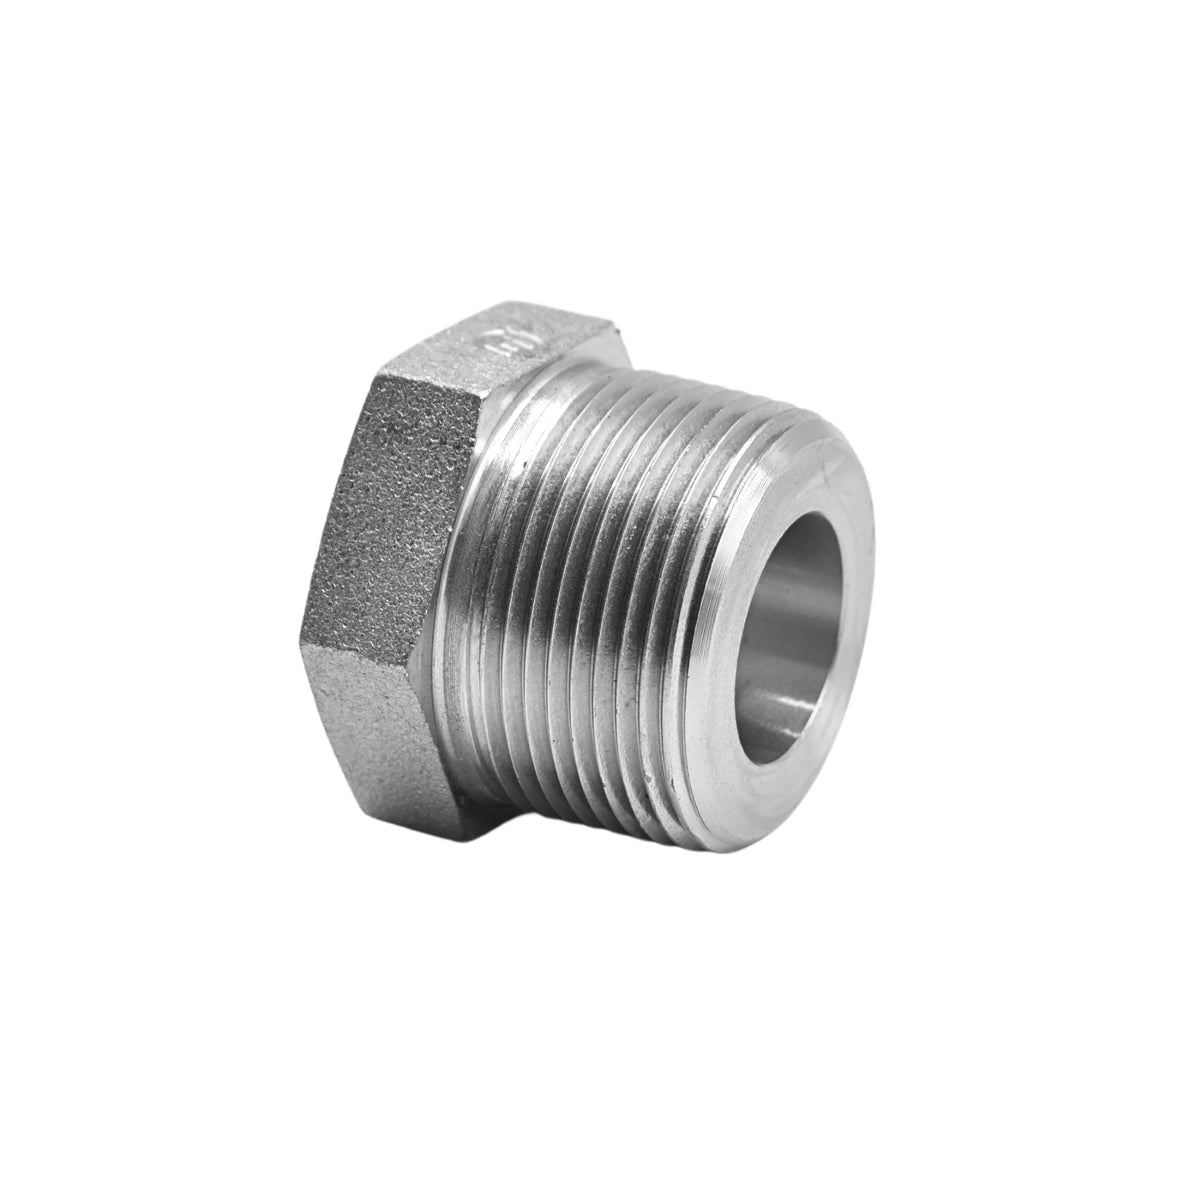 Hydraulics | 20MP-12FP Red Bushing Adapter | 5406-20-12